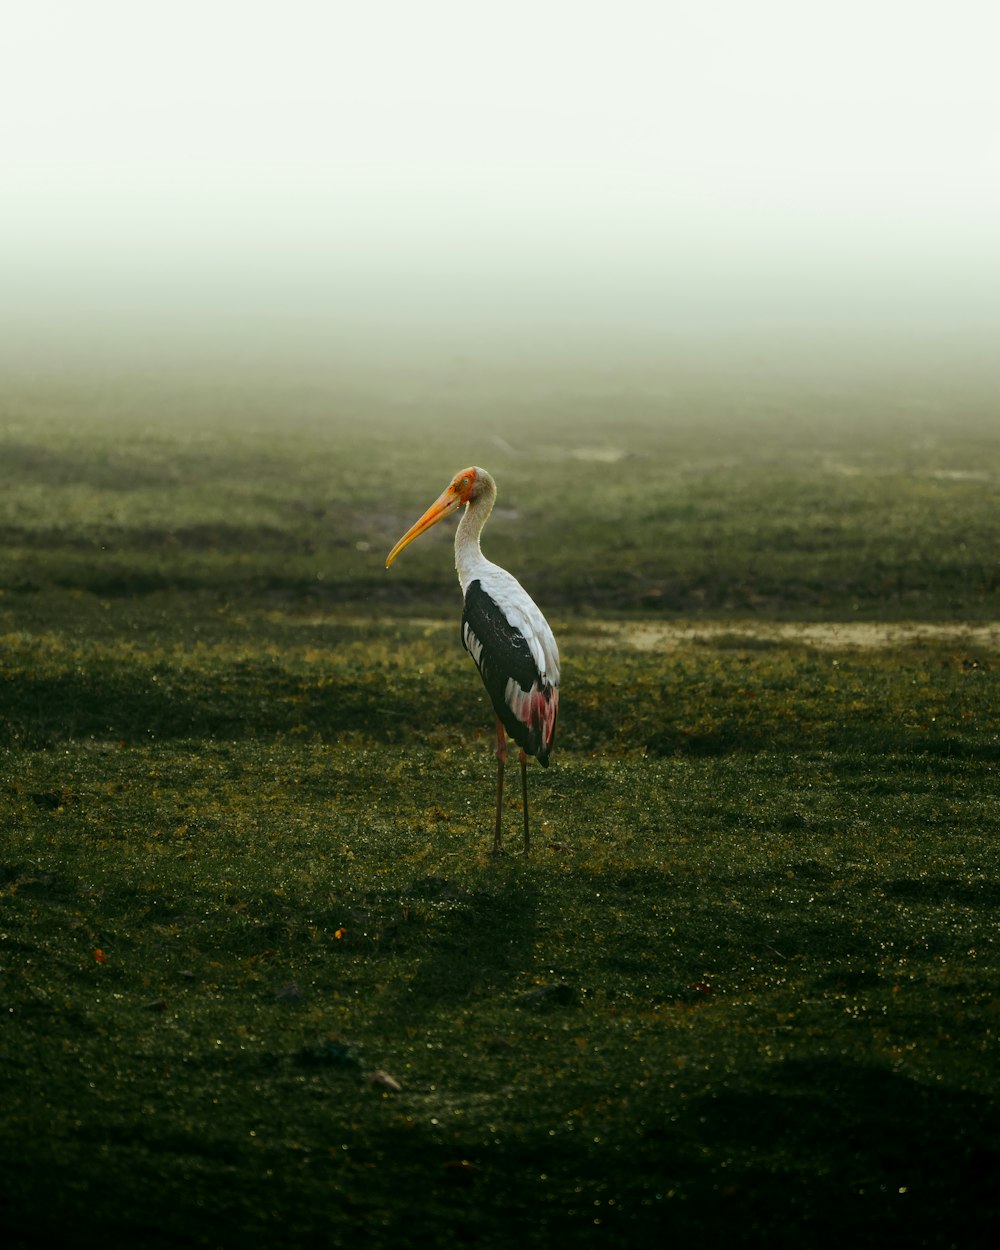 a stork standing in a field on a foggy day